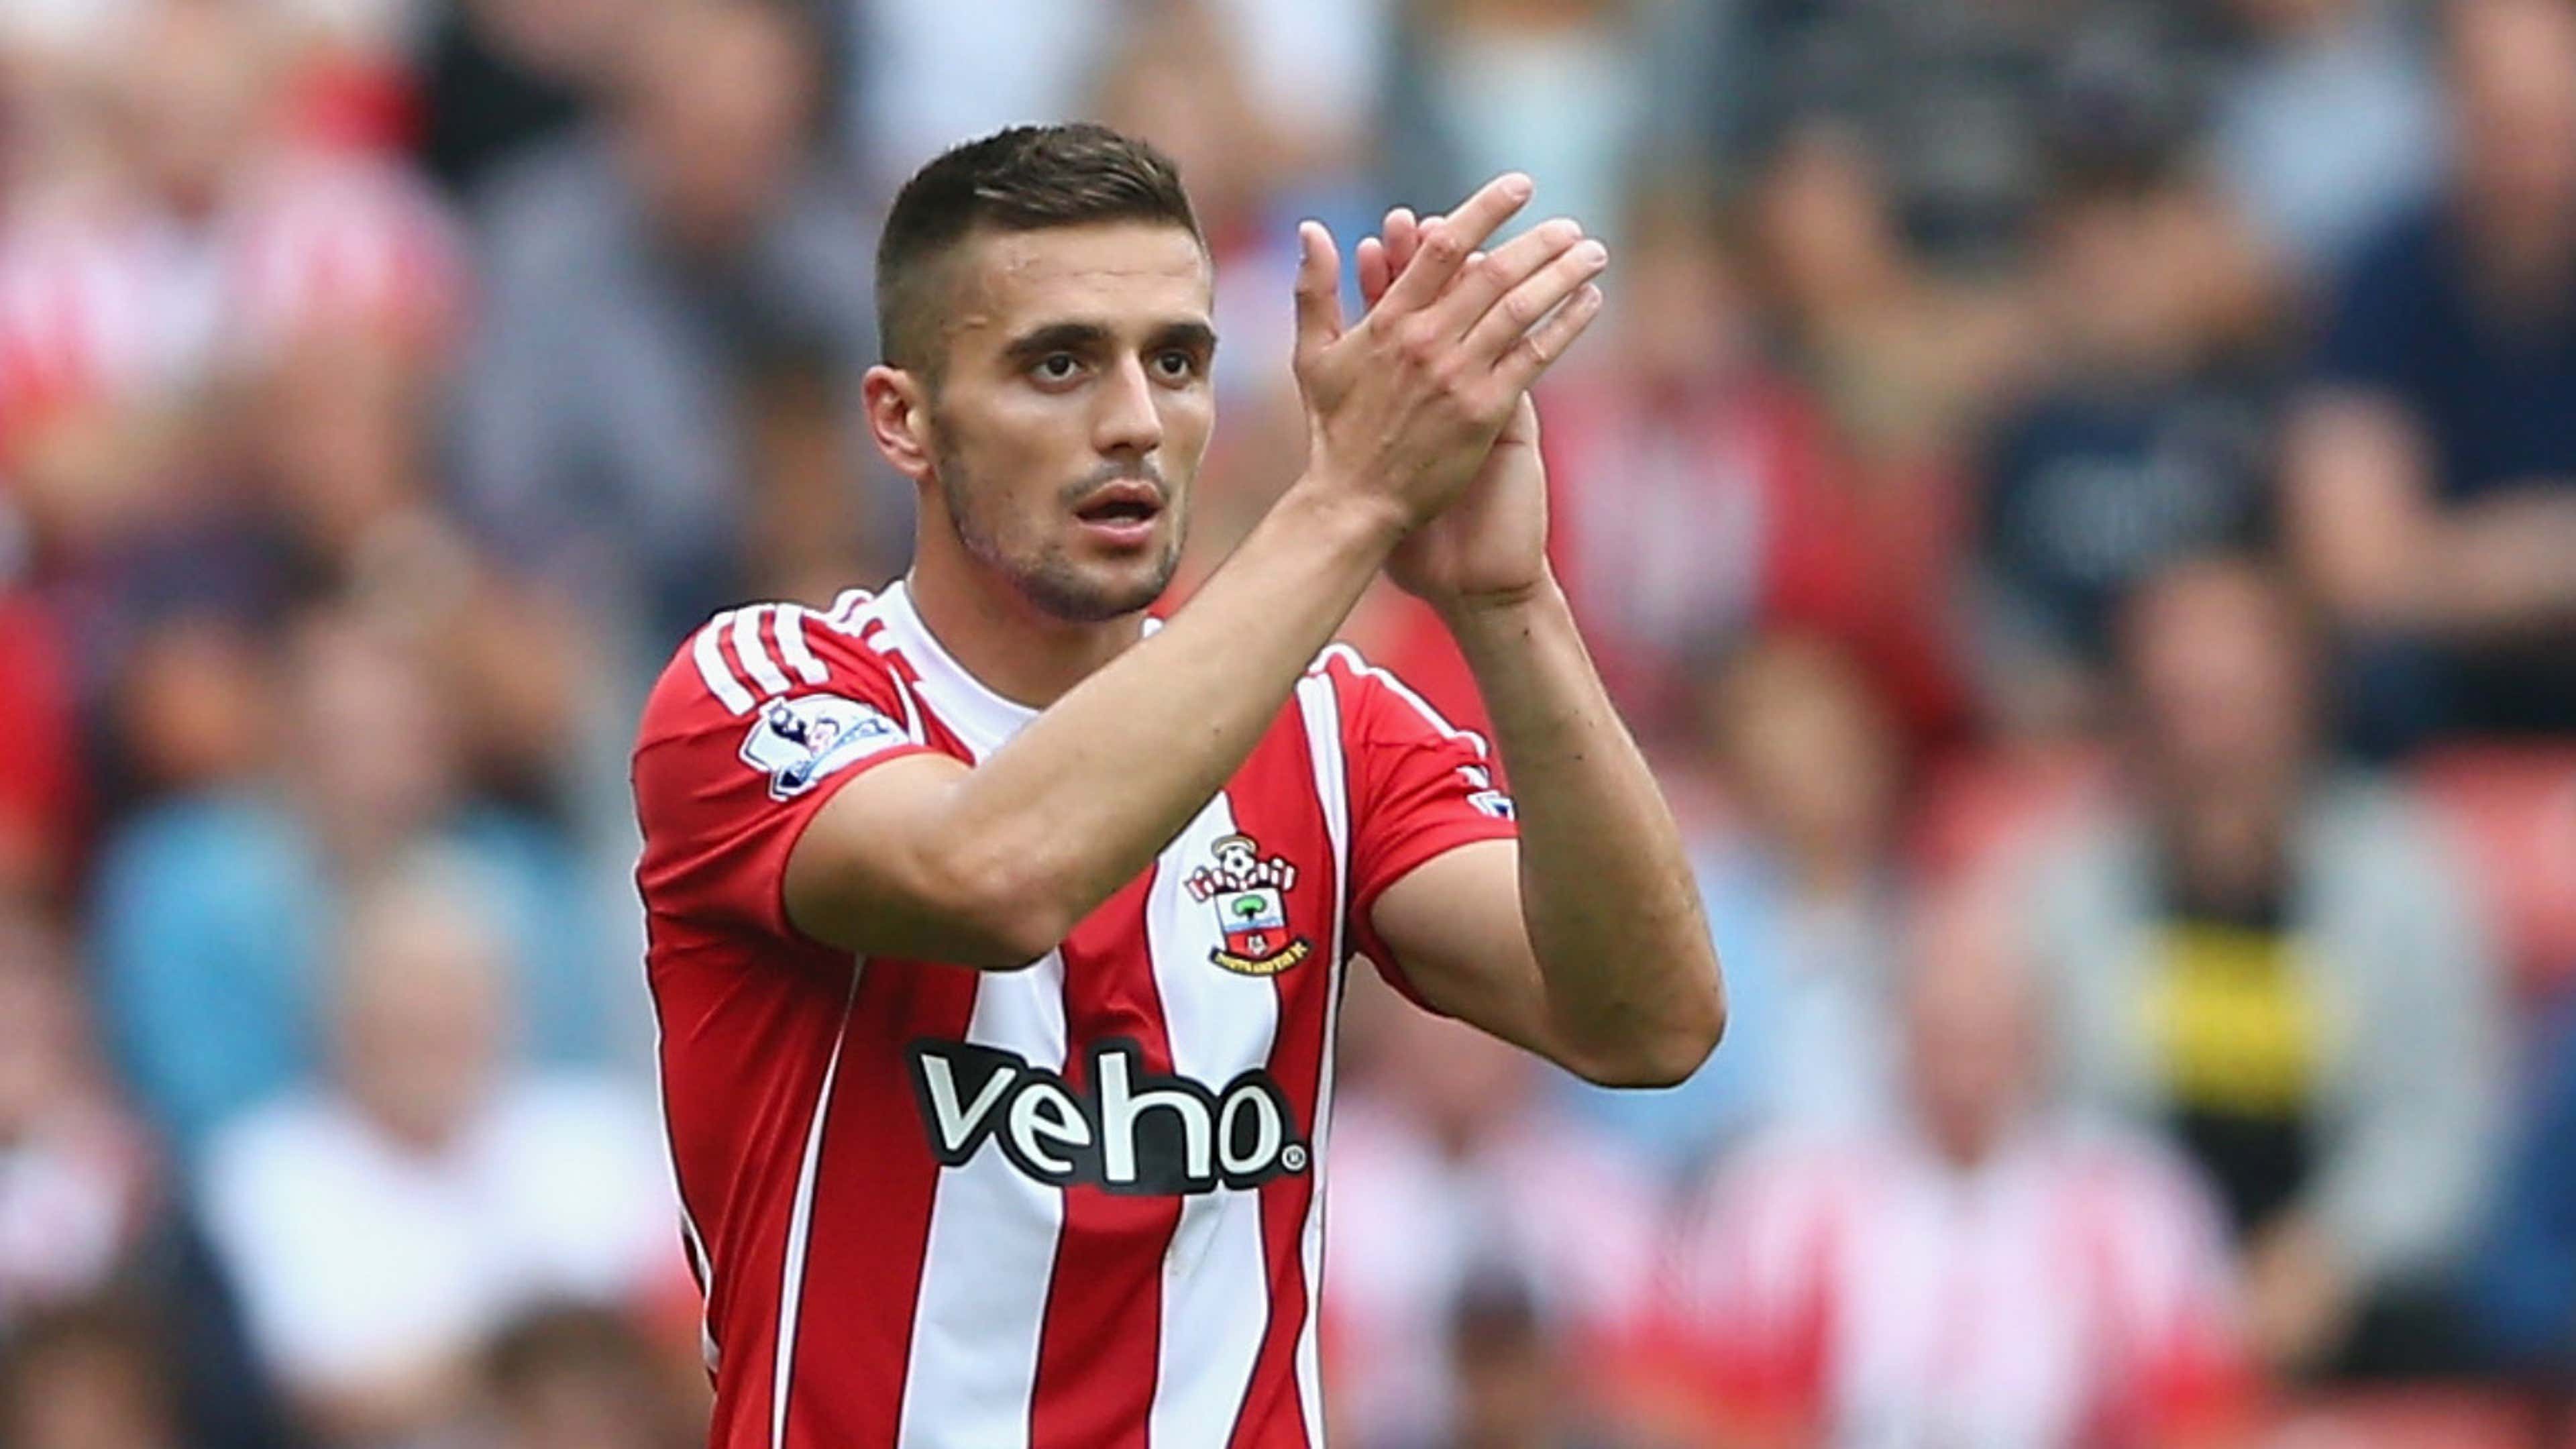 Premier League news: Chelsea's Matic one of the best but Liverpool's Grujic needs time, says Tadic | Goal.com